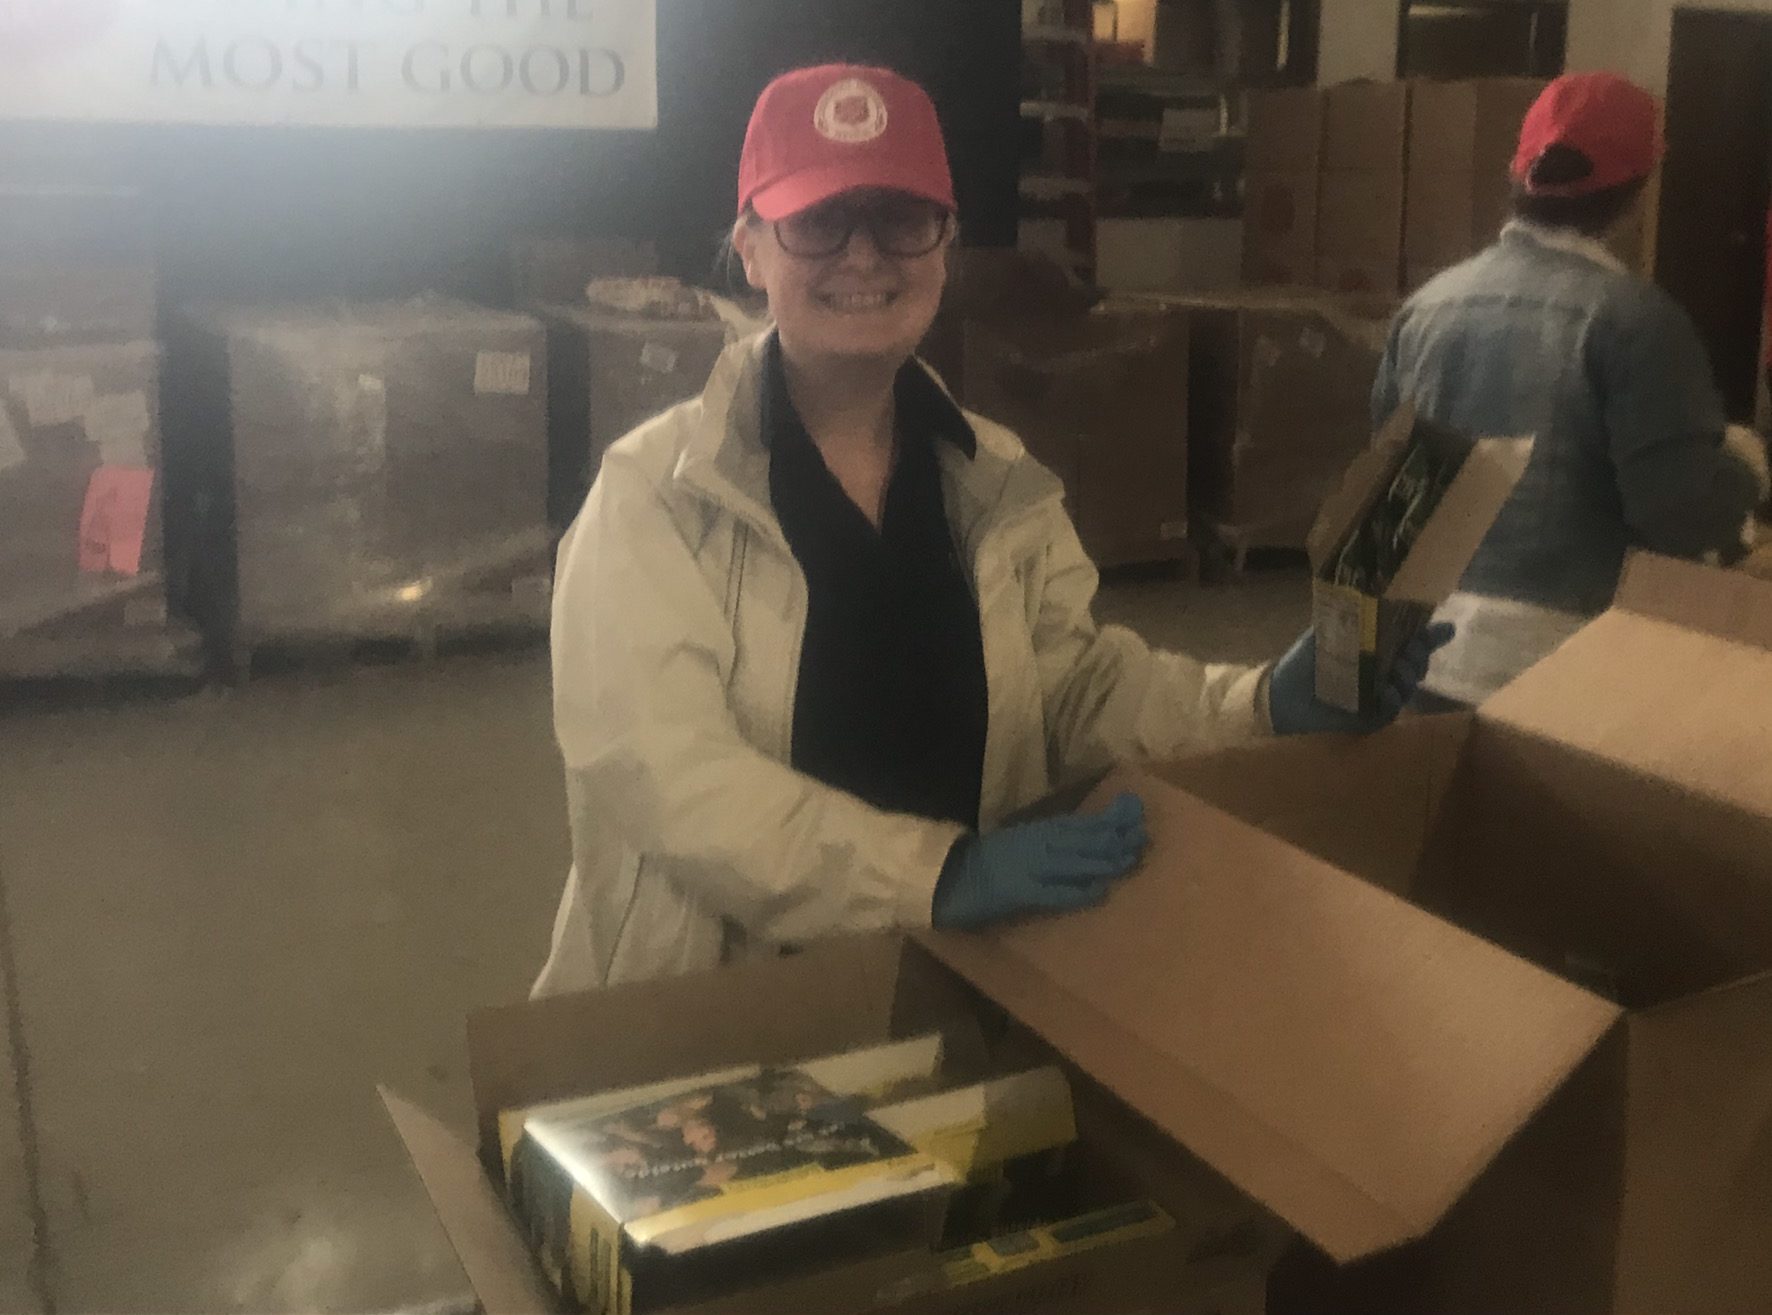 A woman wearing a hat and coat smiles for the camera while packing a cardboard box with food.